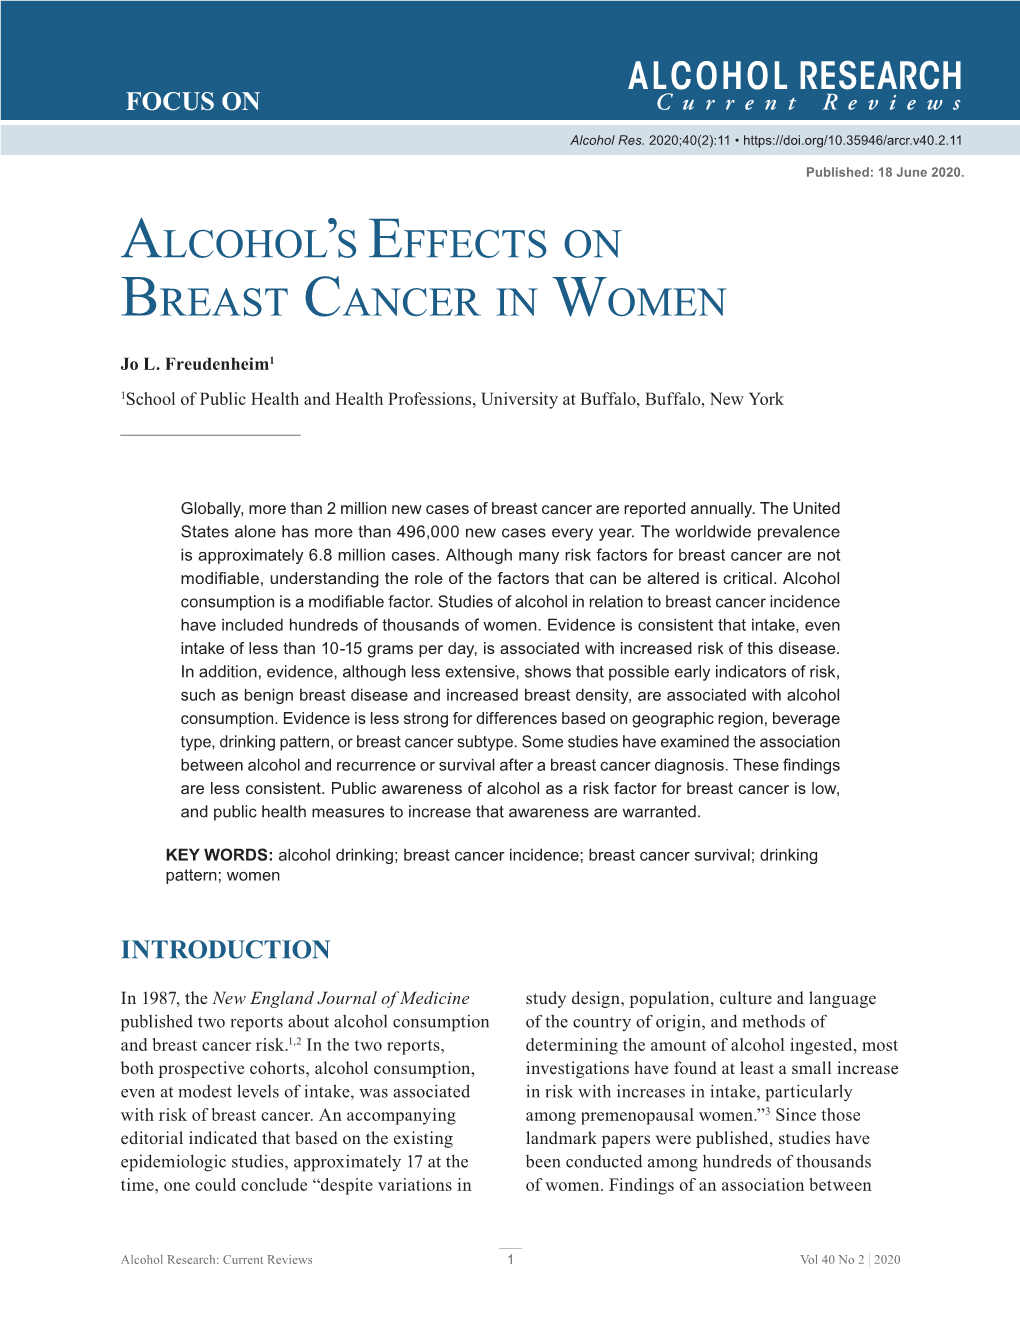 Alcohol's Effects on Breast Cancer in Women